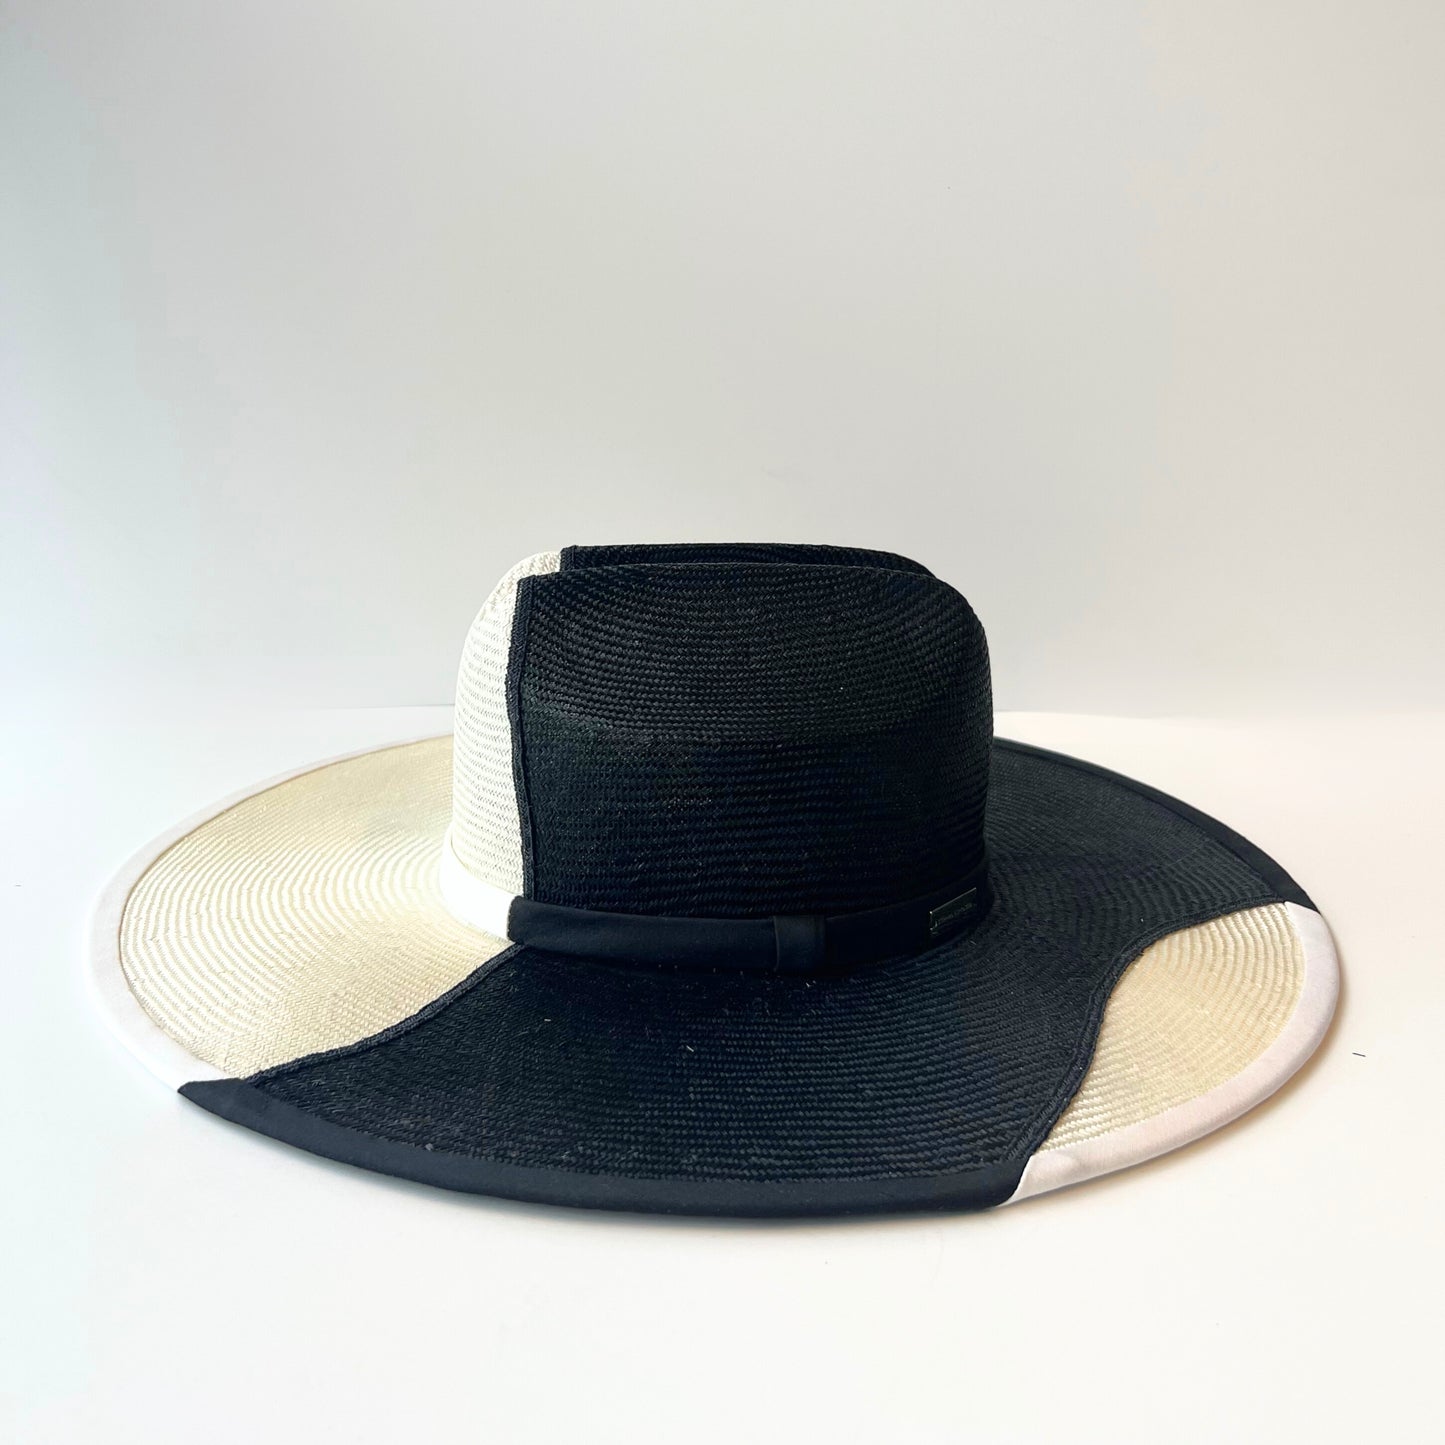 Clarke Duo Hat: White and Black